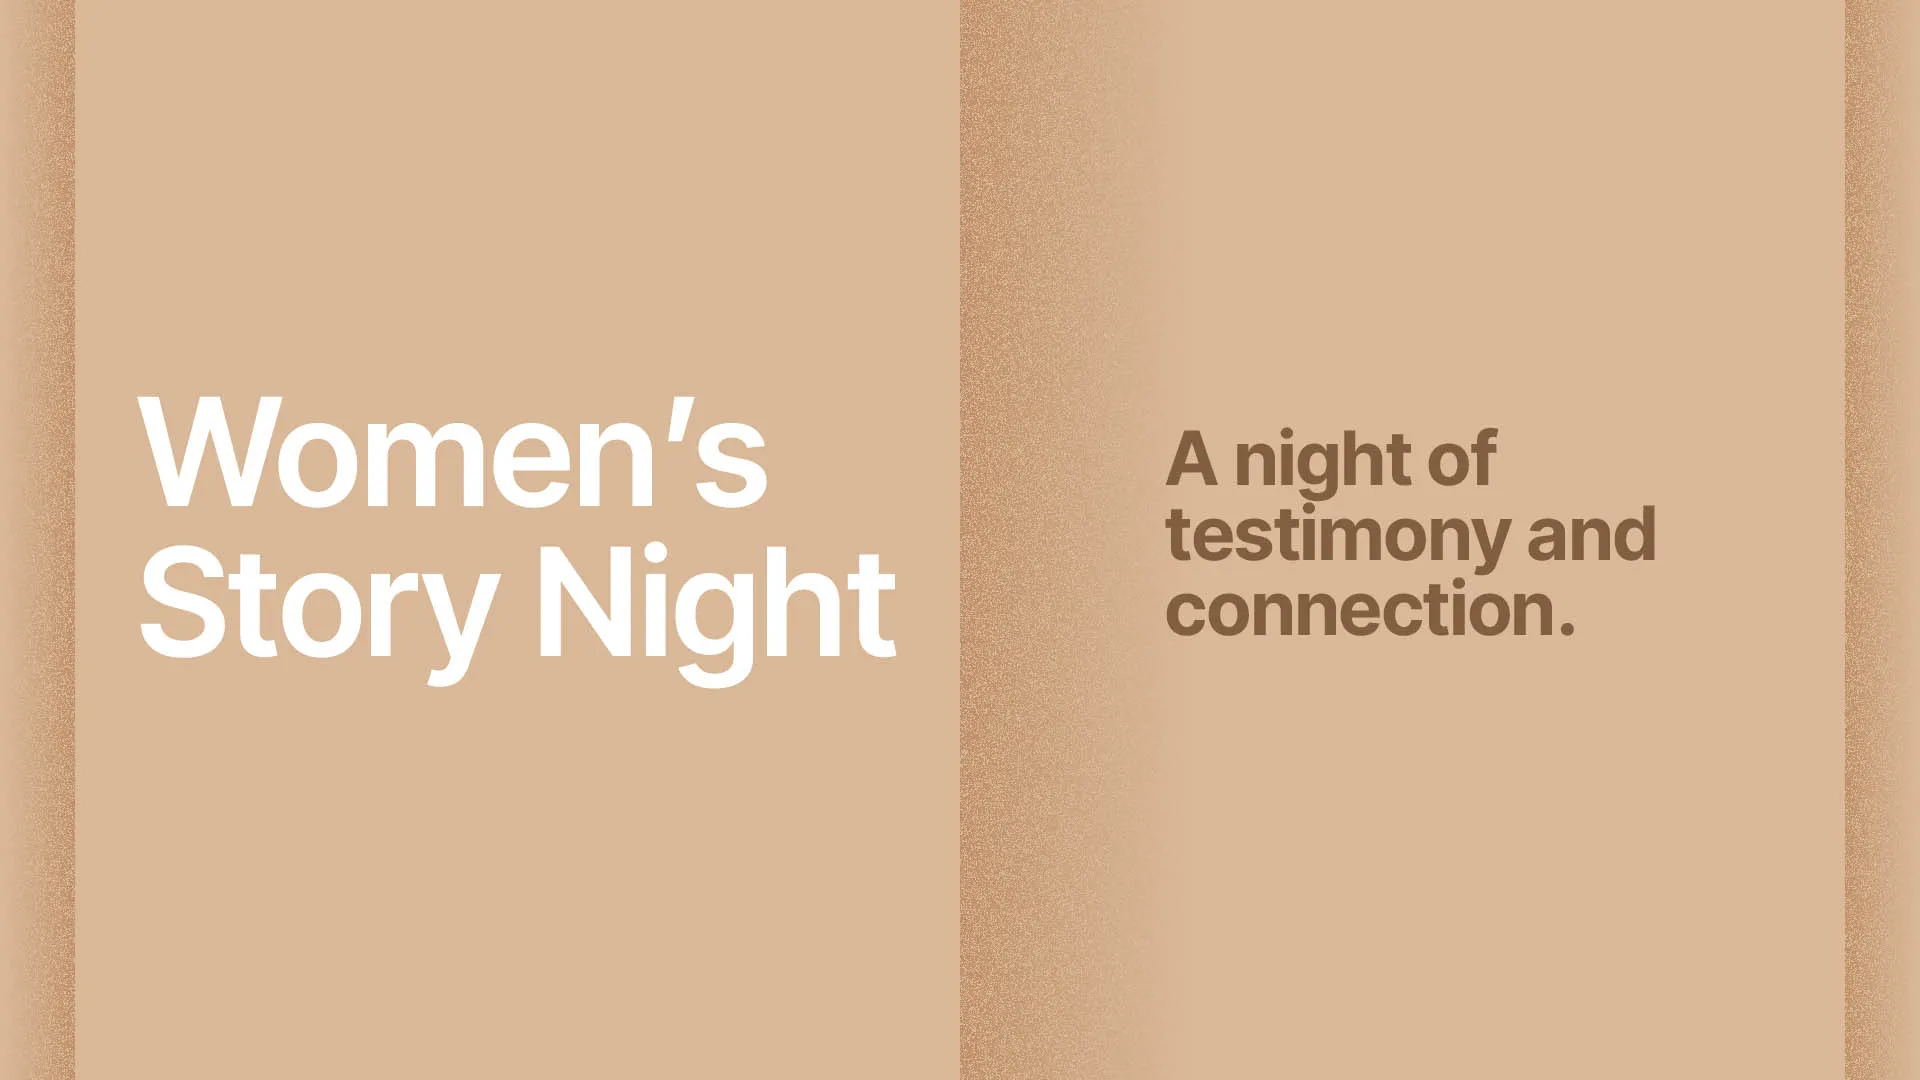 Women's Story Night. A night of testimony and connection.